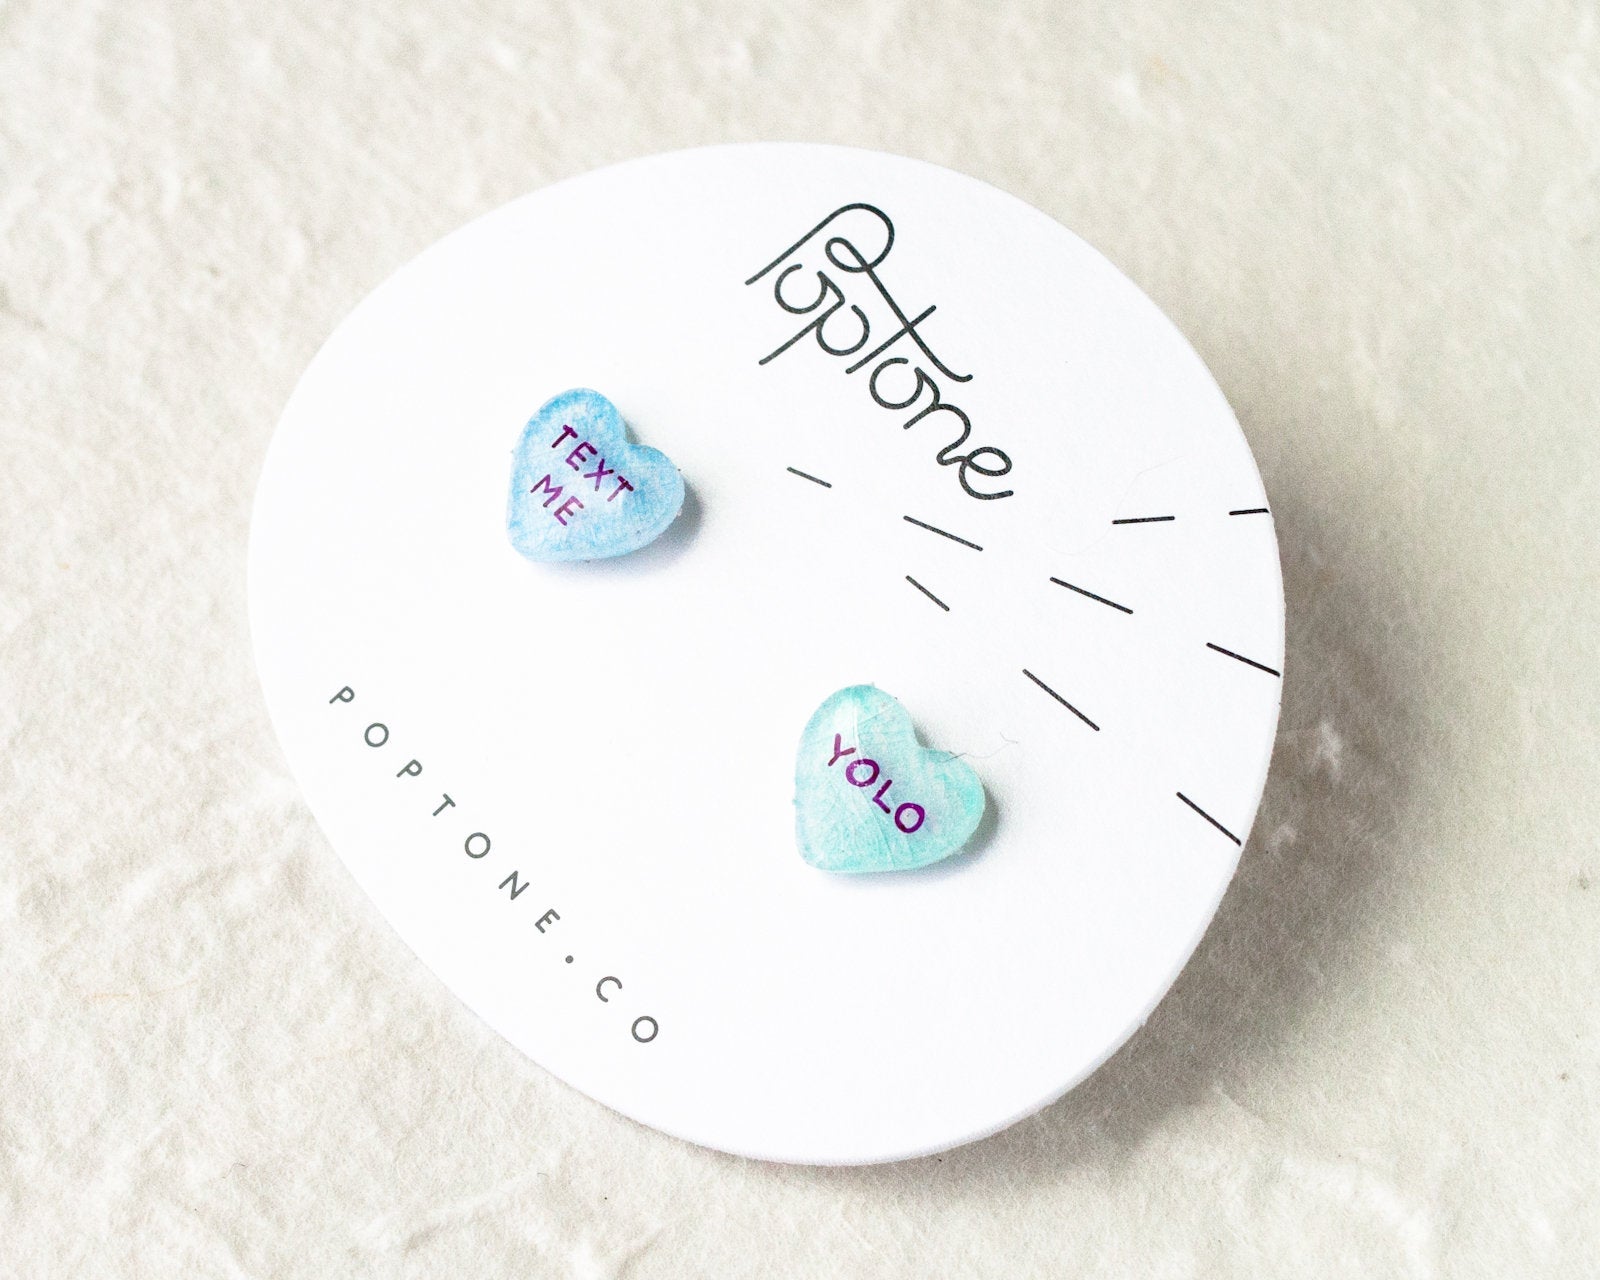 YOLO + Text Me Candy Heart Valentine Stud Earrings